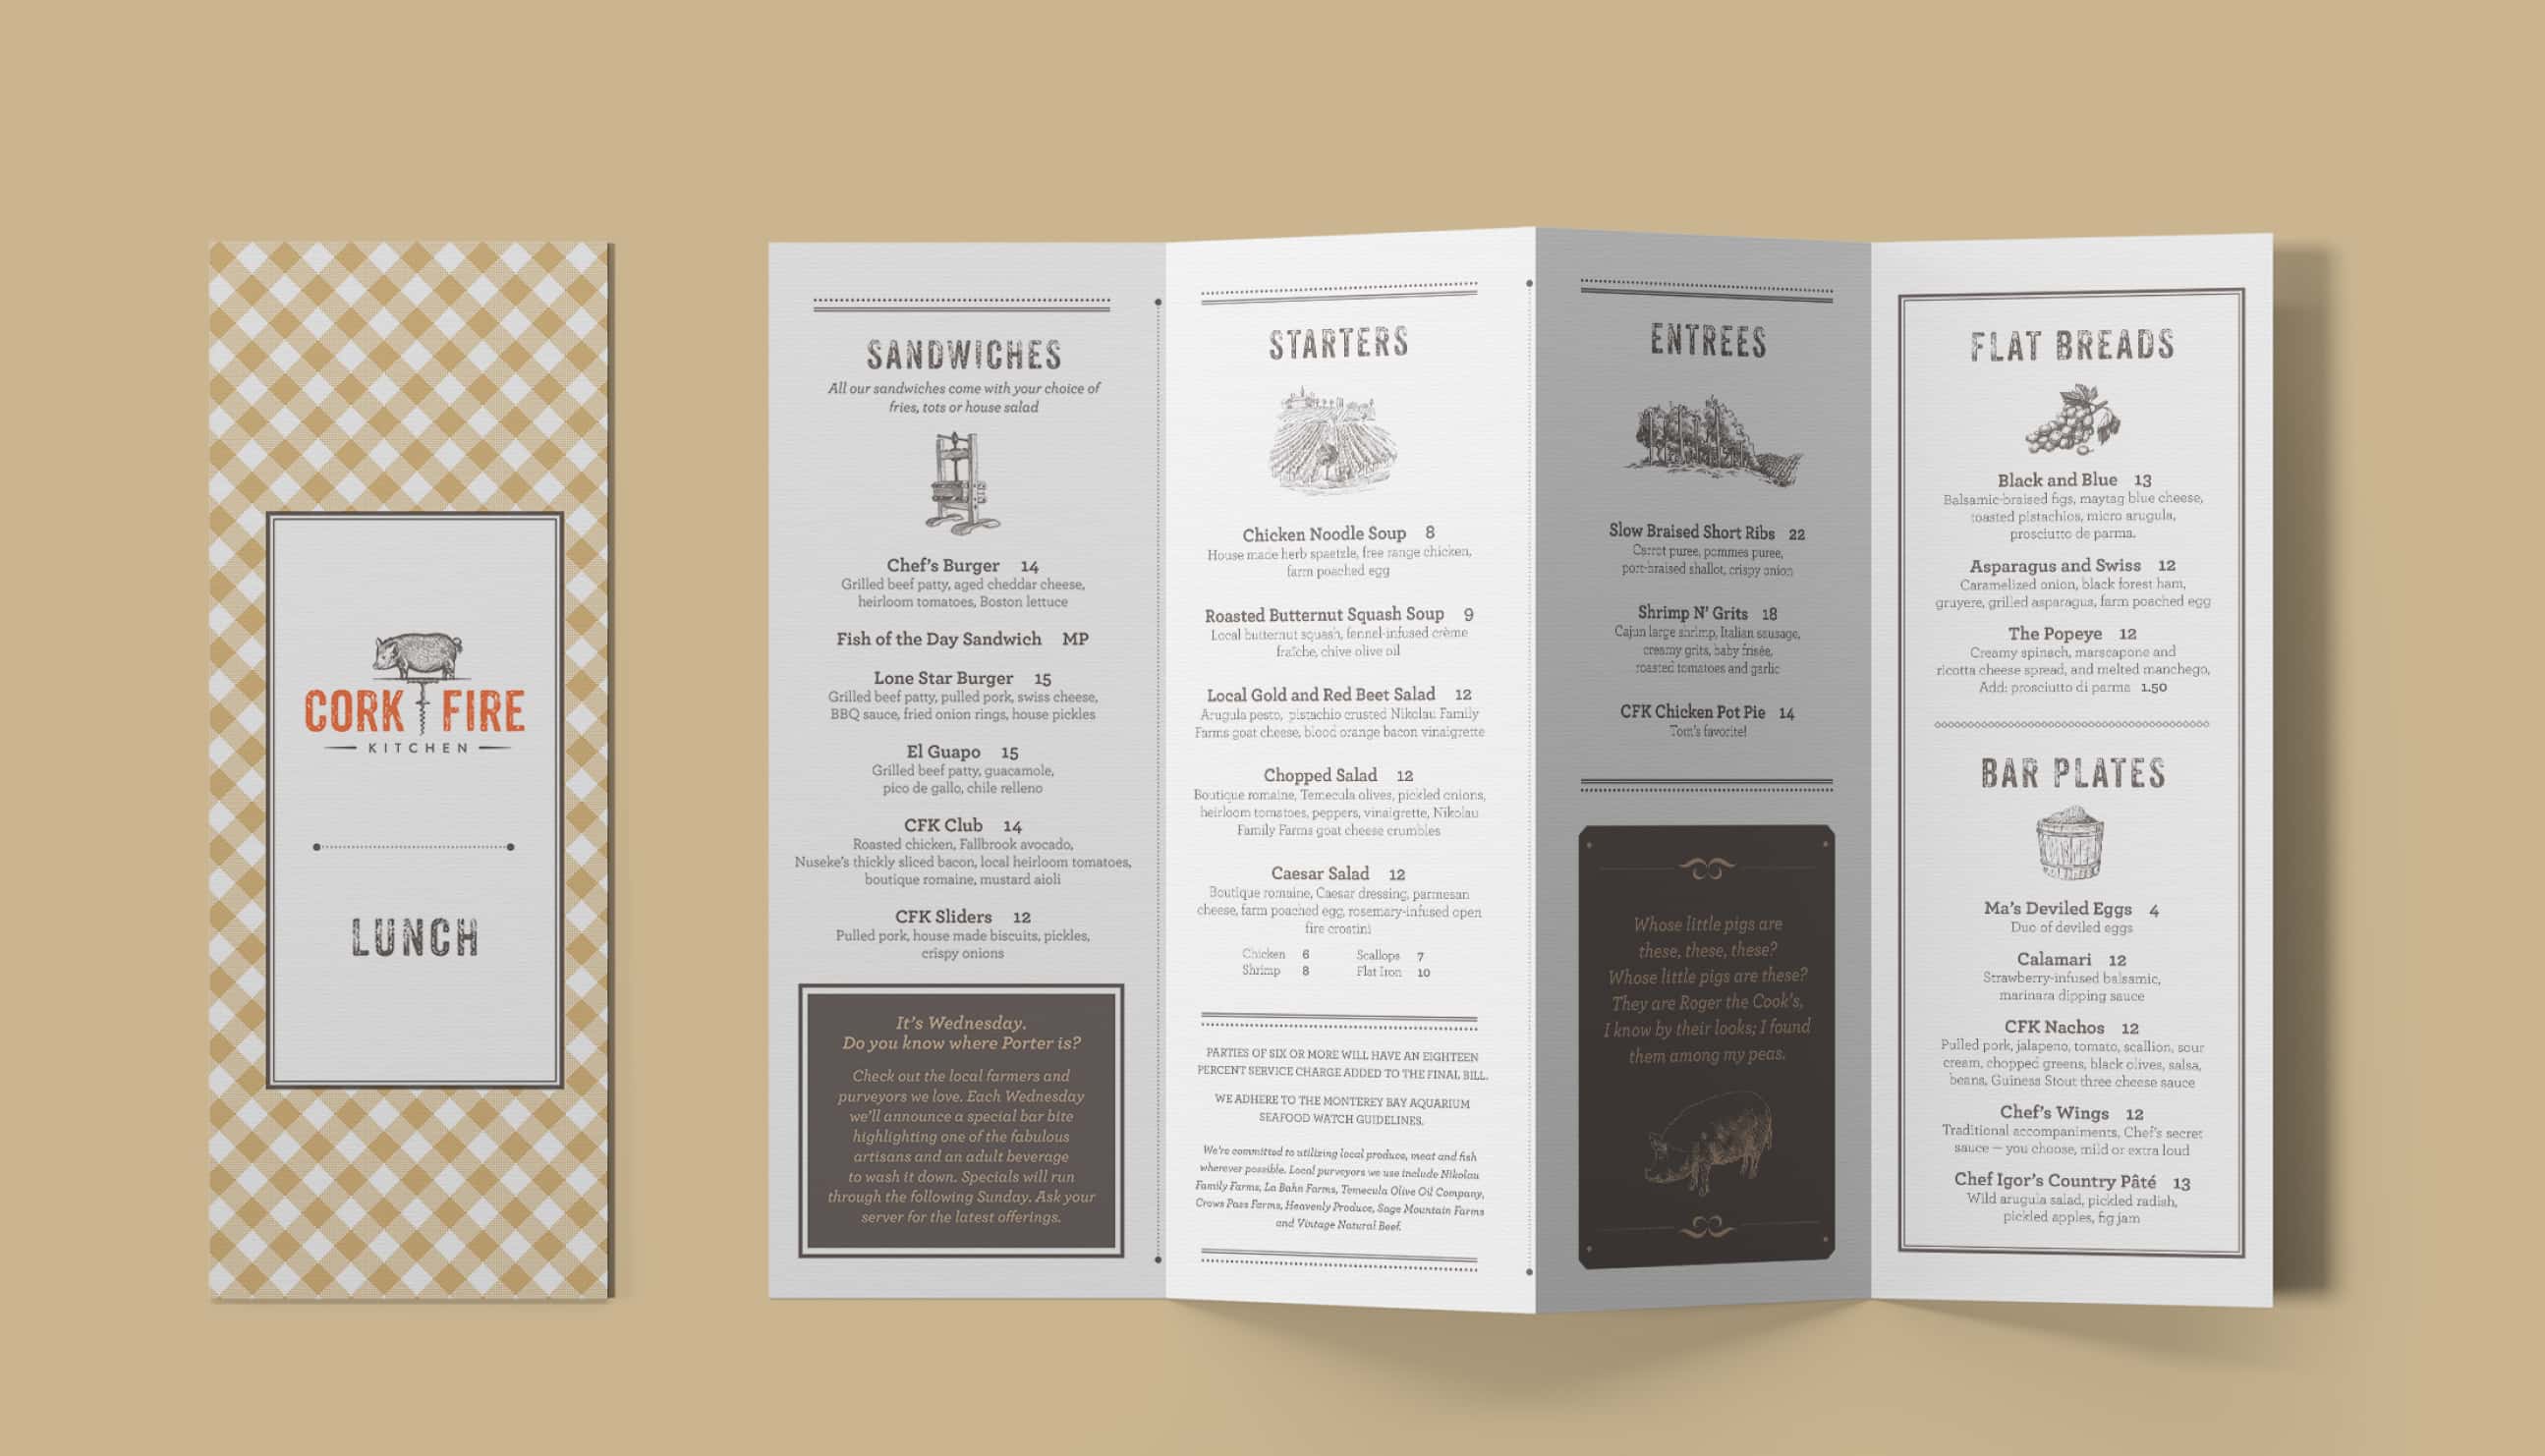 An open trifold menu for 'CORK & FIRE' restaurant, displaying various sections for sandwiches, starters, entrees, flatbreads, and bar plates, each with detailed descriptions and prices of the offerings, next to a lunch menu card with a checkered pattern.